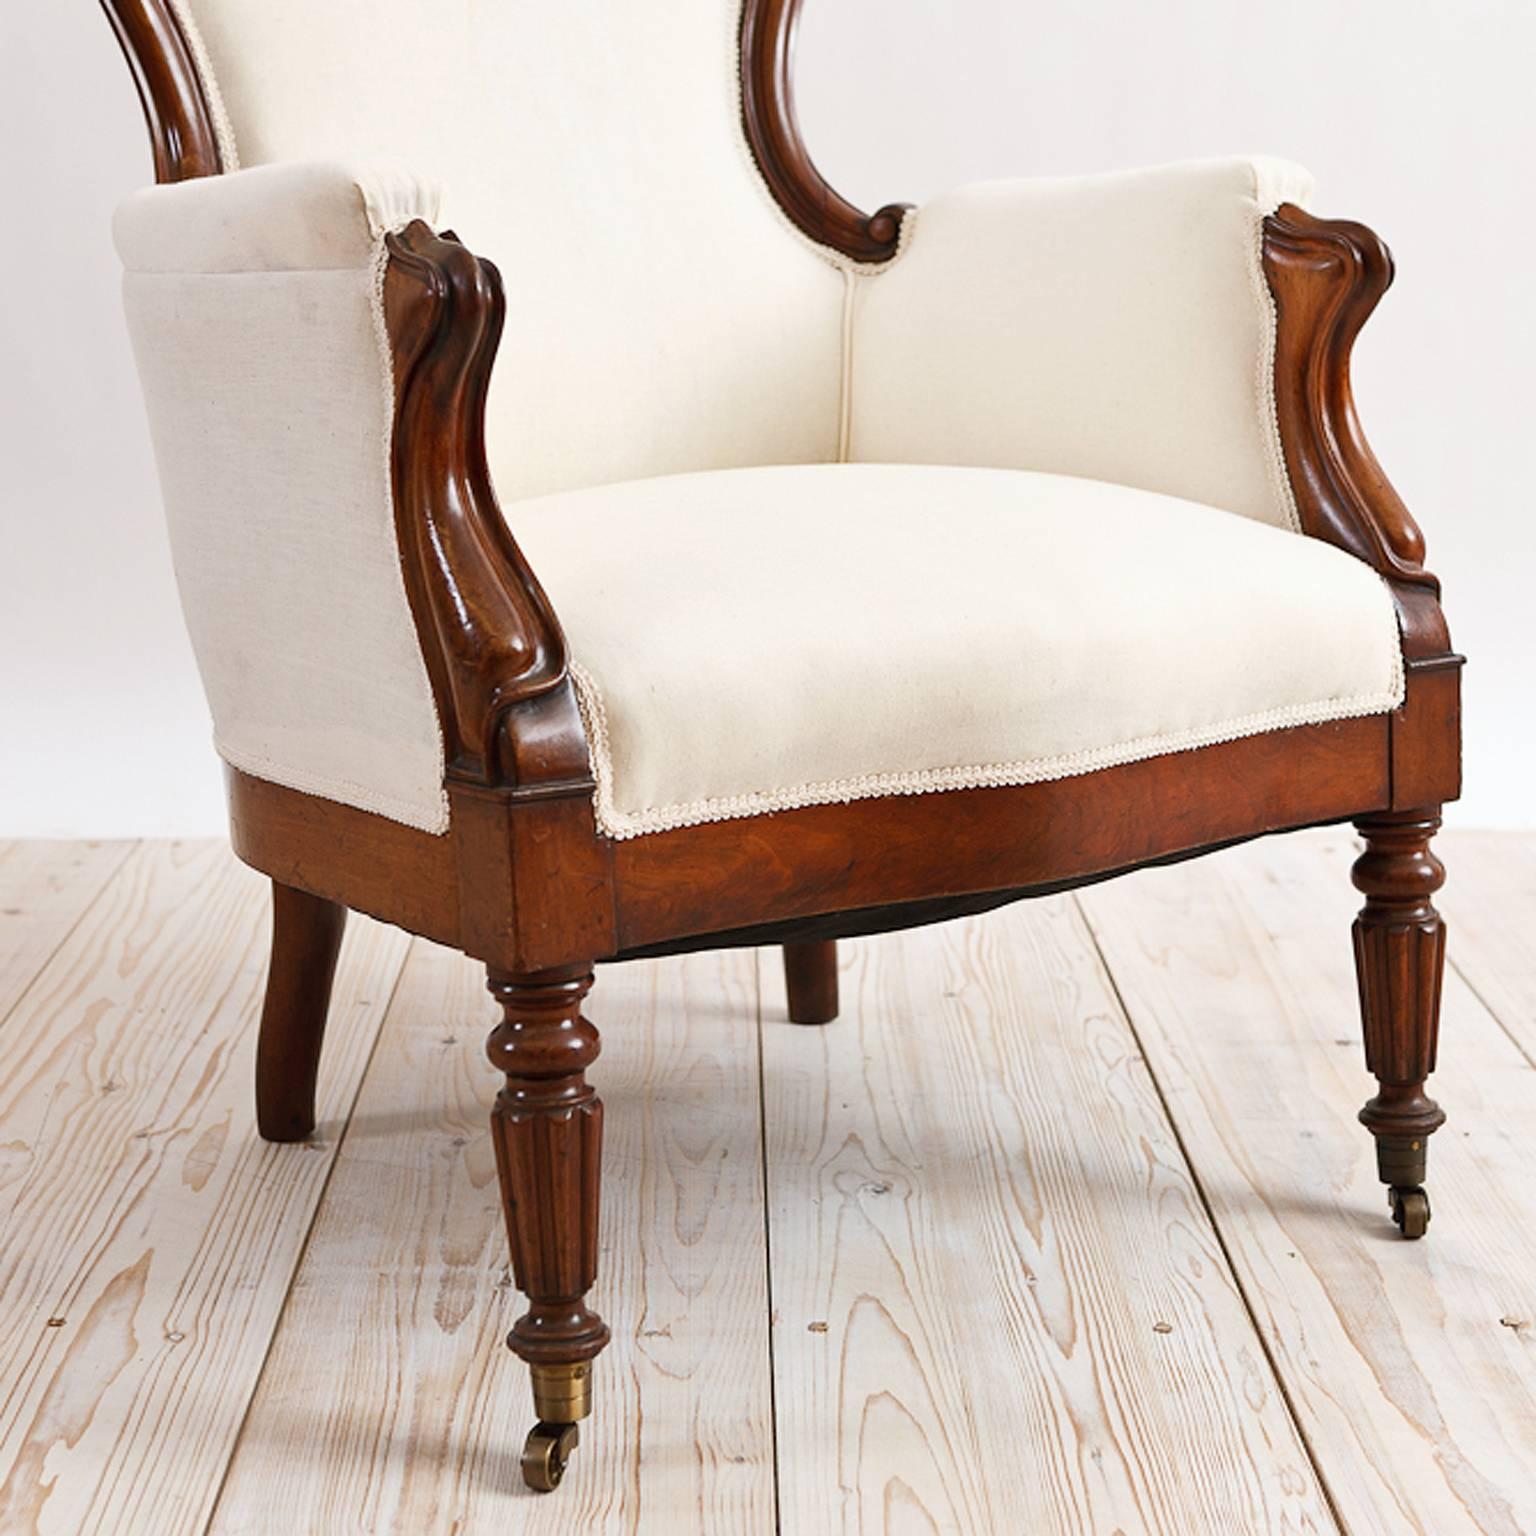 A very fine Charles X or early Louis Philippe bergère in mahogany with acanthus and shell carving on crest of balloon-back, with rounded frame, turned and reeded legs ending on casters, France, circa 1835.
Restored frame and French-polished with